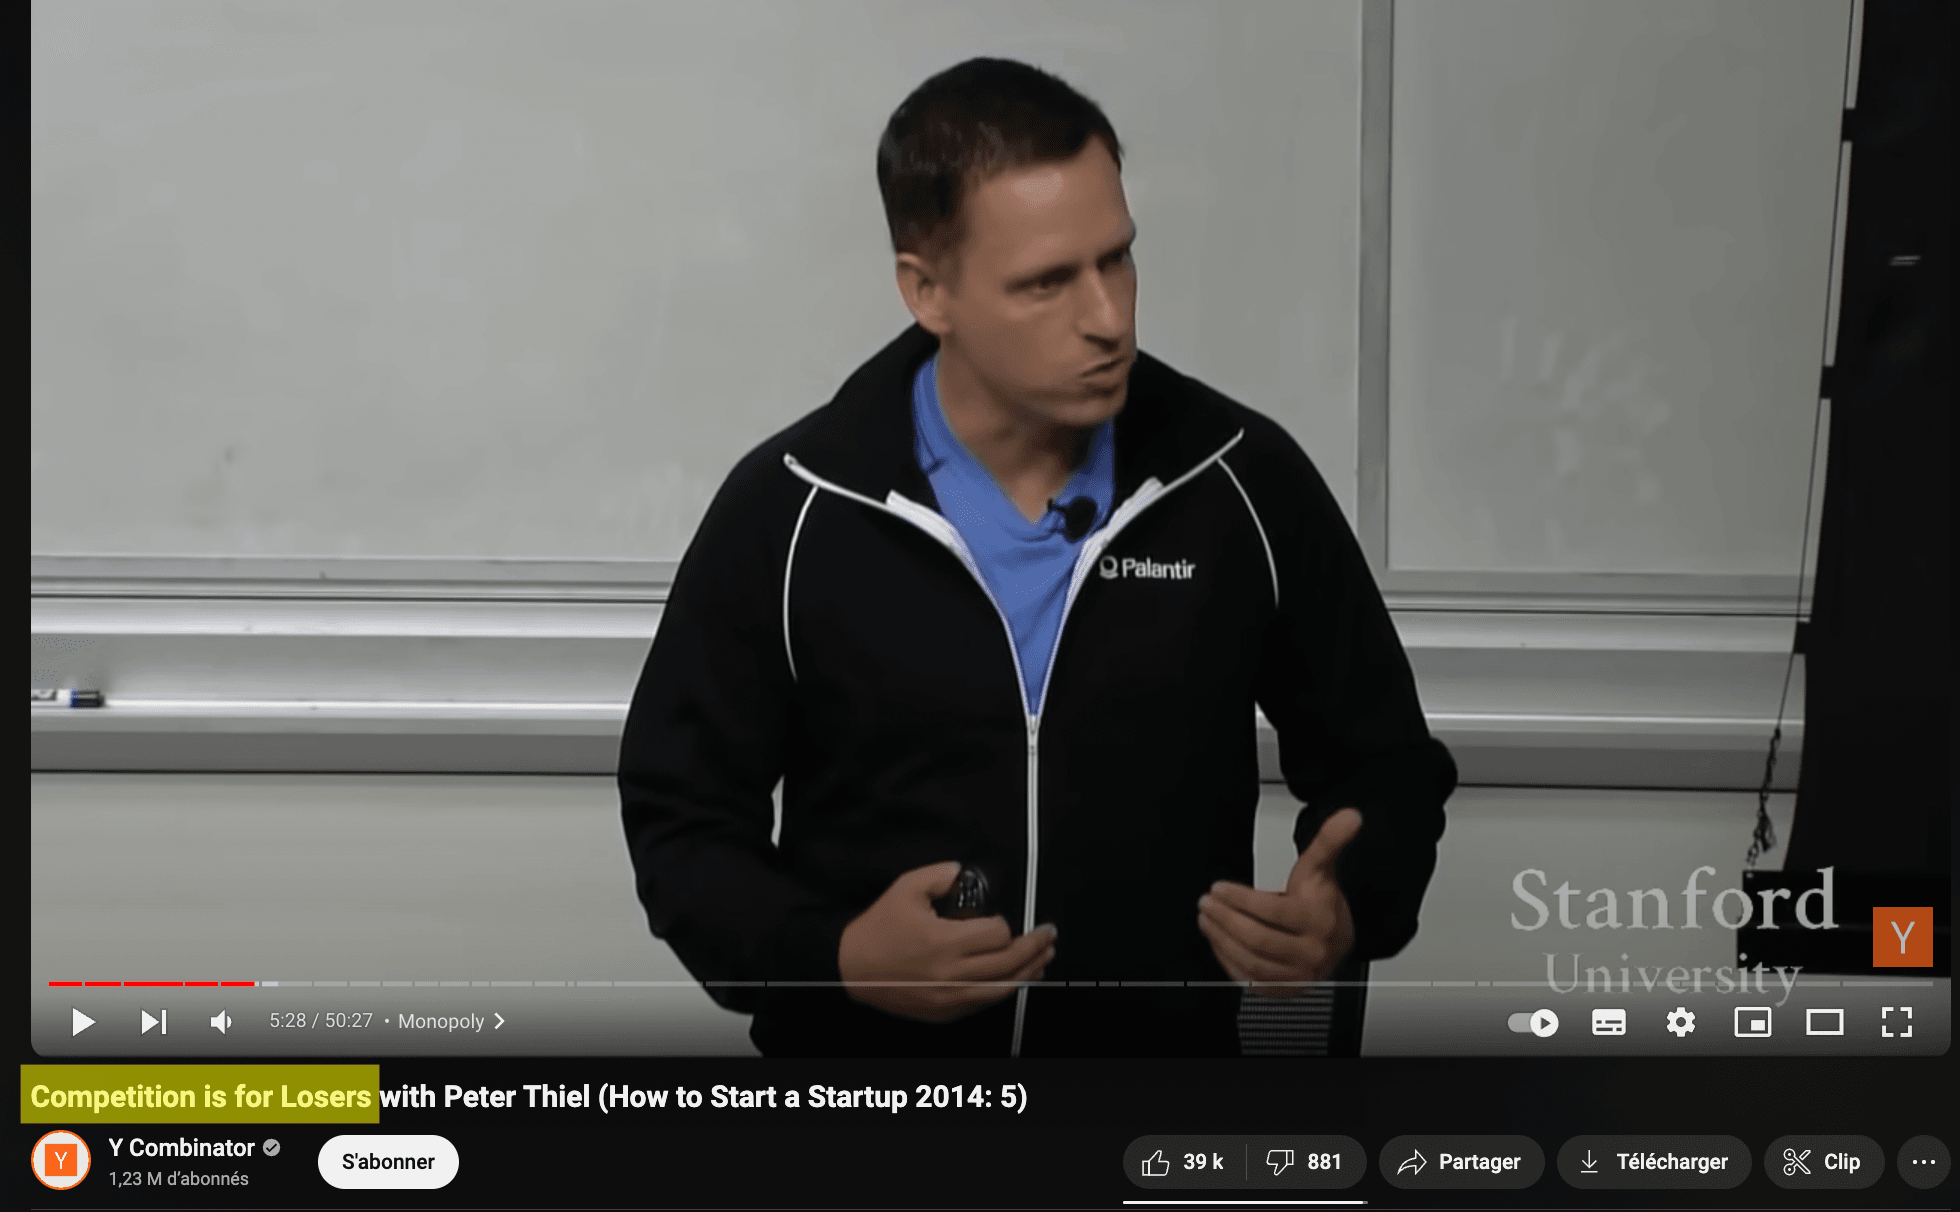 competition is for losers with peter thiel - image27.png